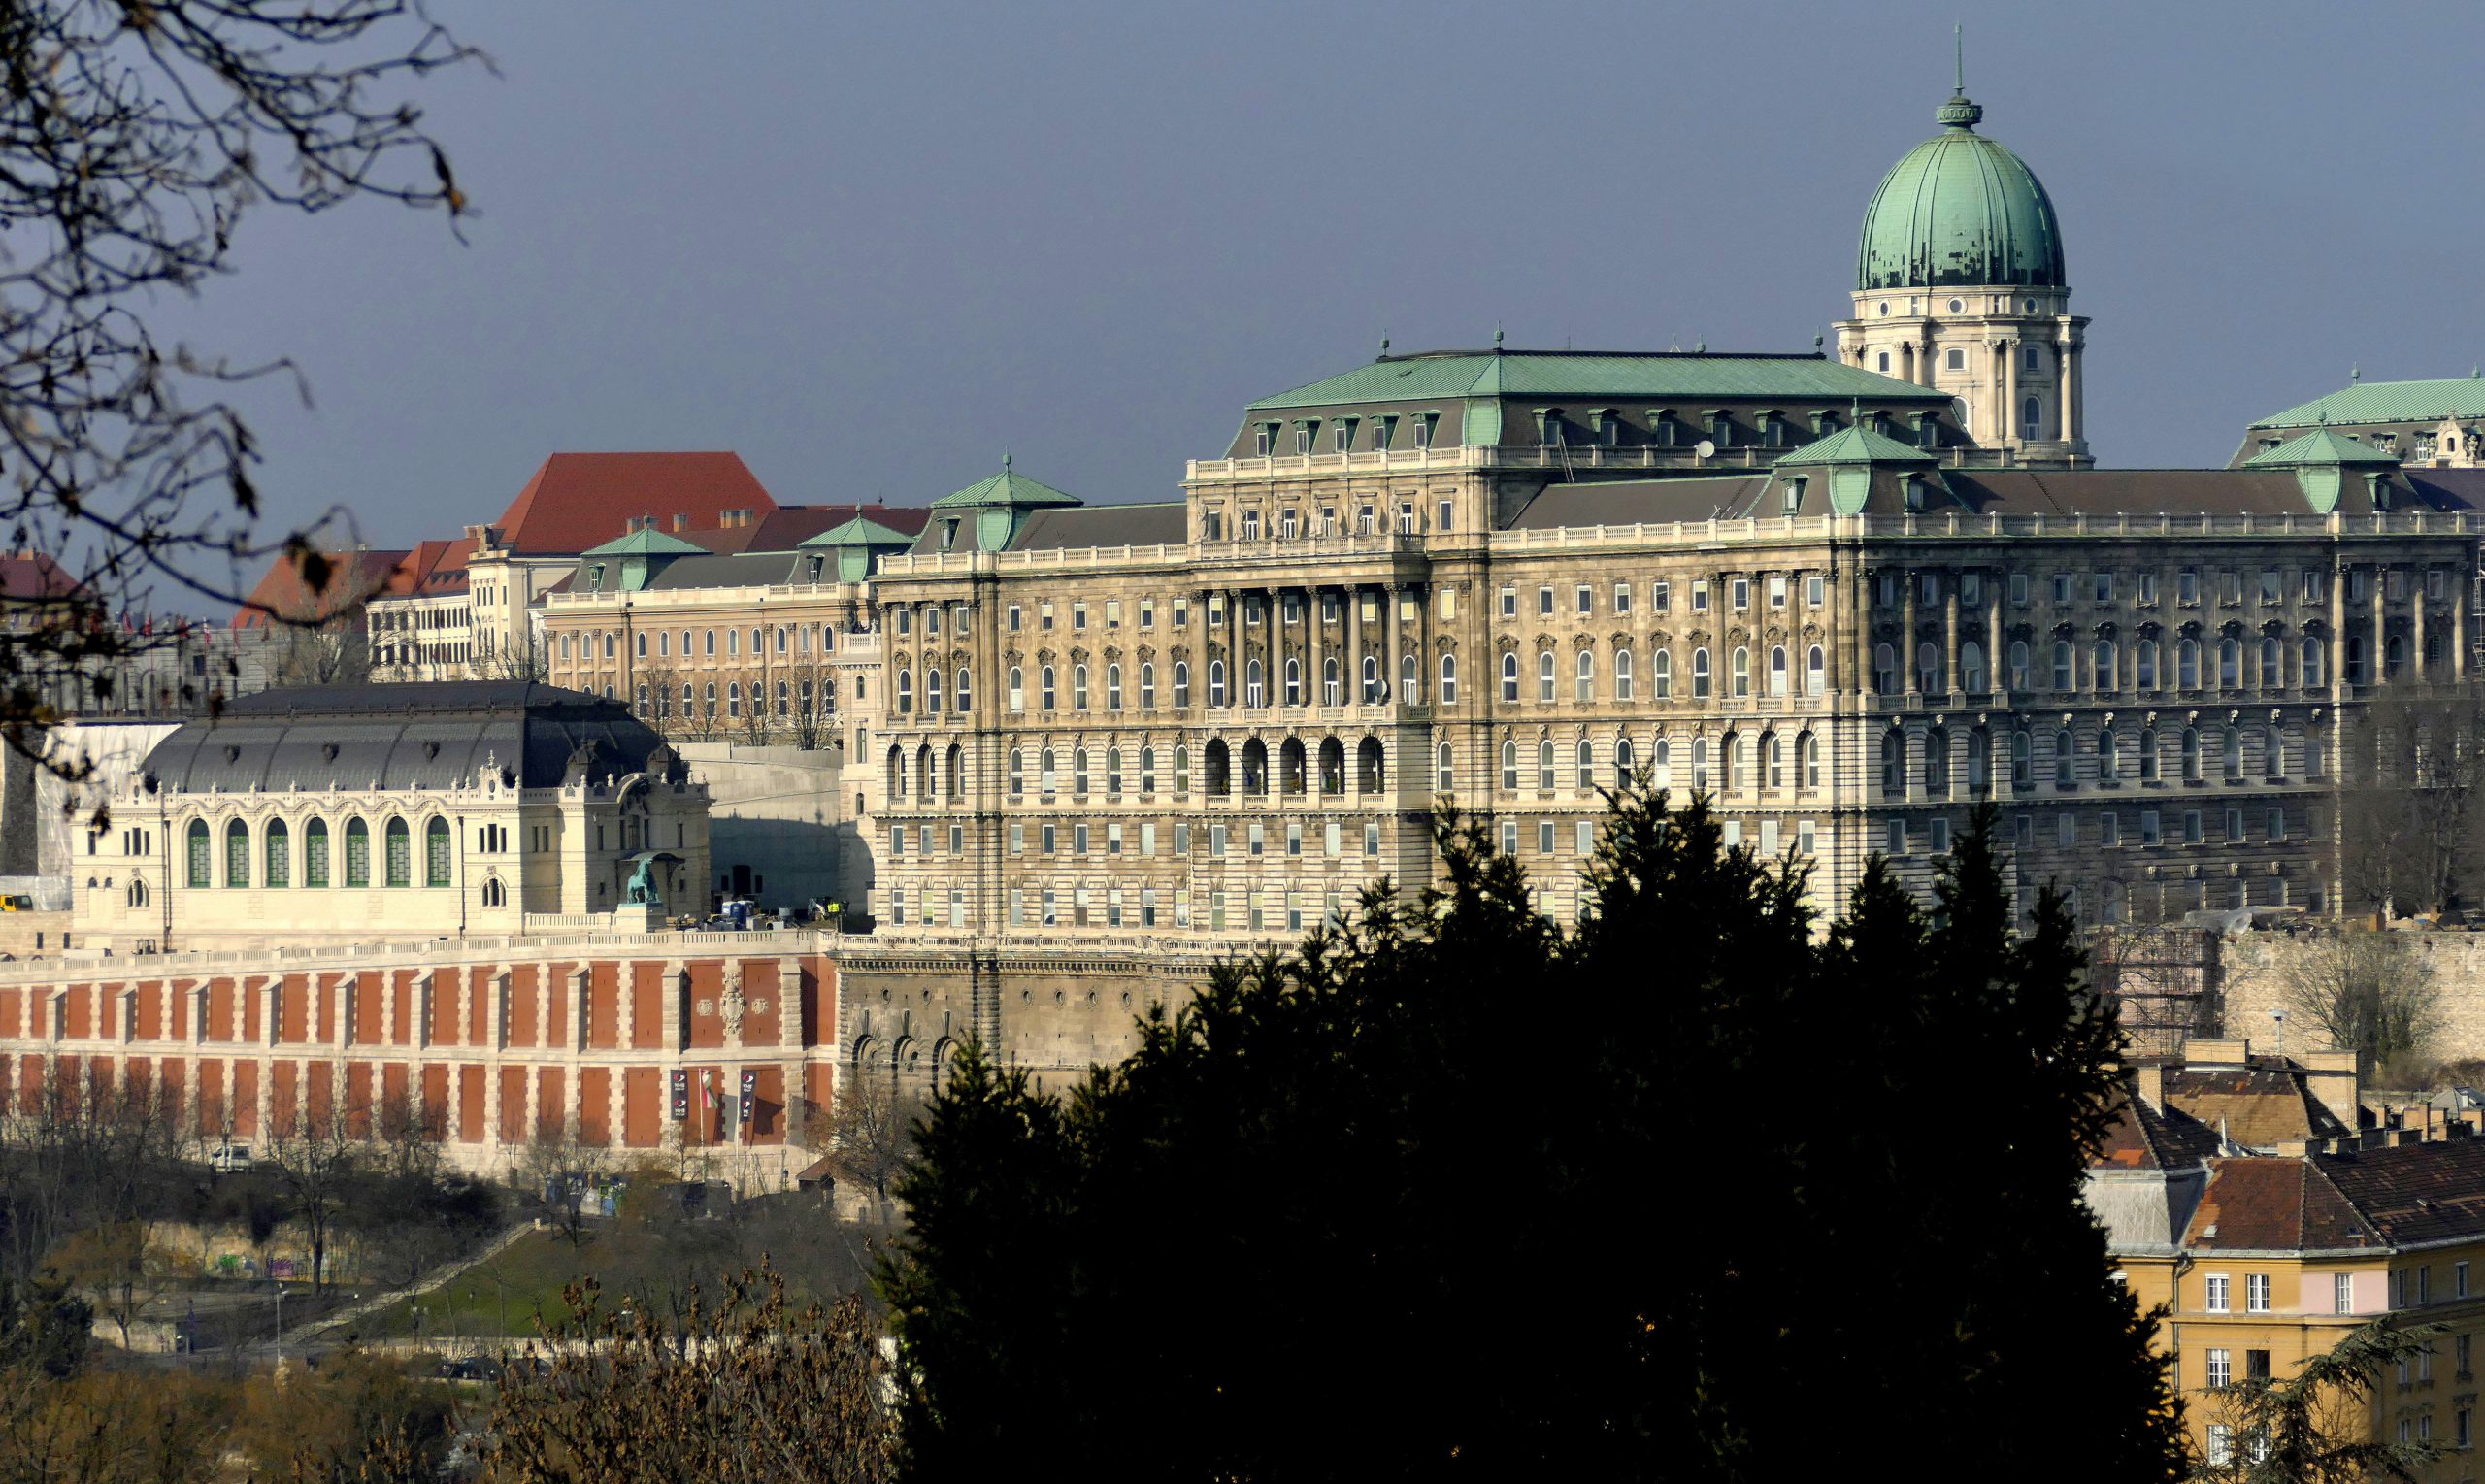 DW Apologizes for 'One-Sided' Buda Castle Report